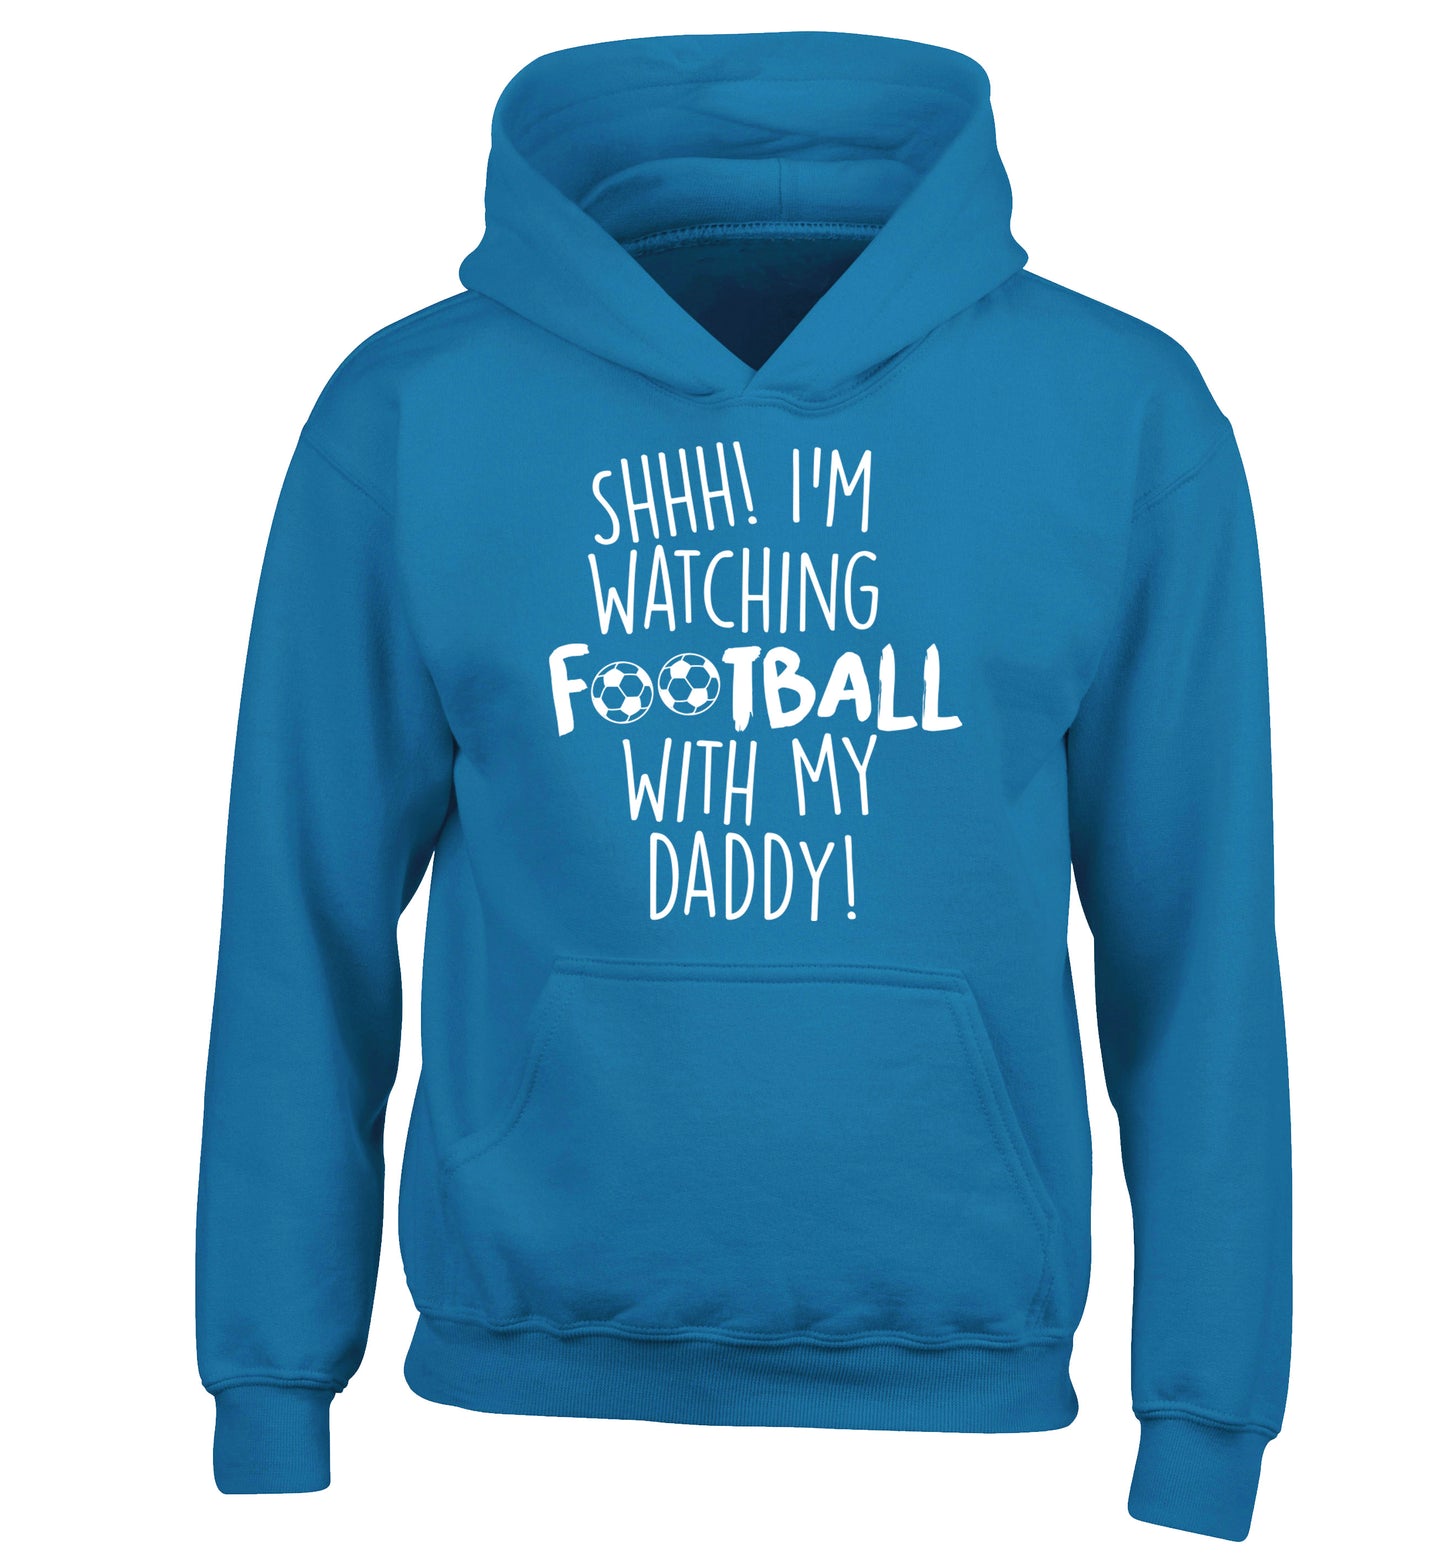 Shhh I'm watching football with my daddy children's blue hoodie 12-14 Years